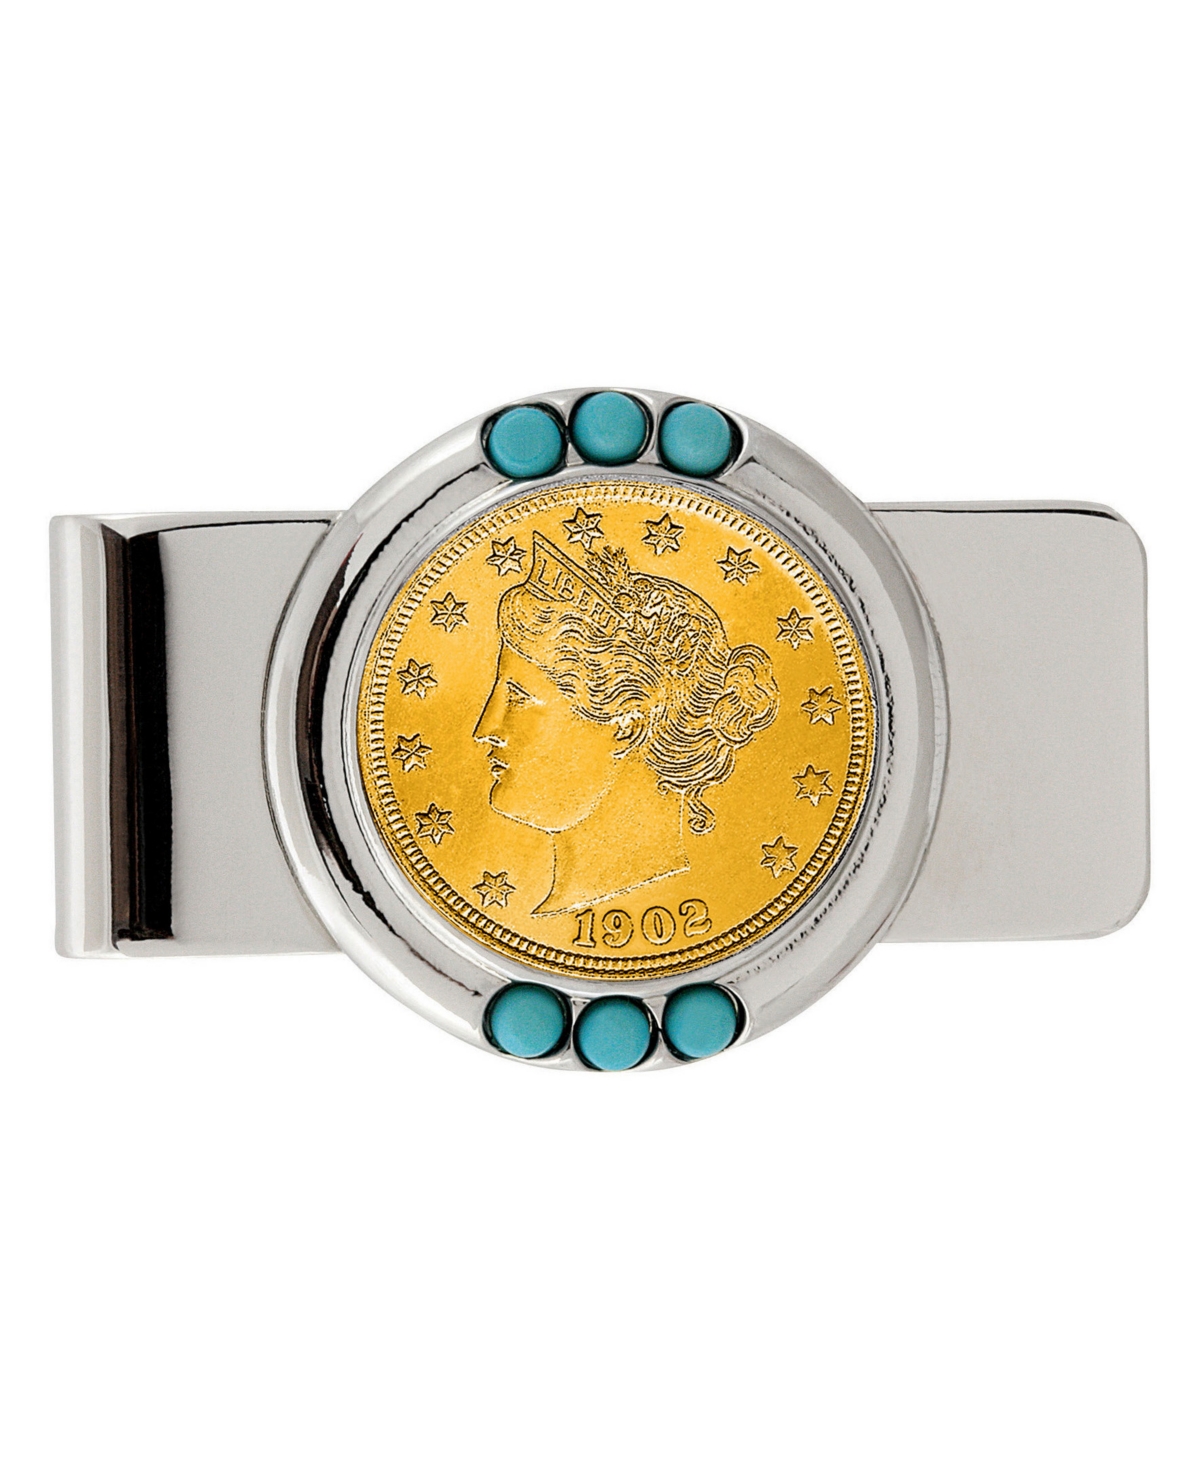 Men's American Coin Treasures Gold-Layered Liberty Nickel Turquoise Coin Money Clip - Silver